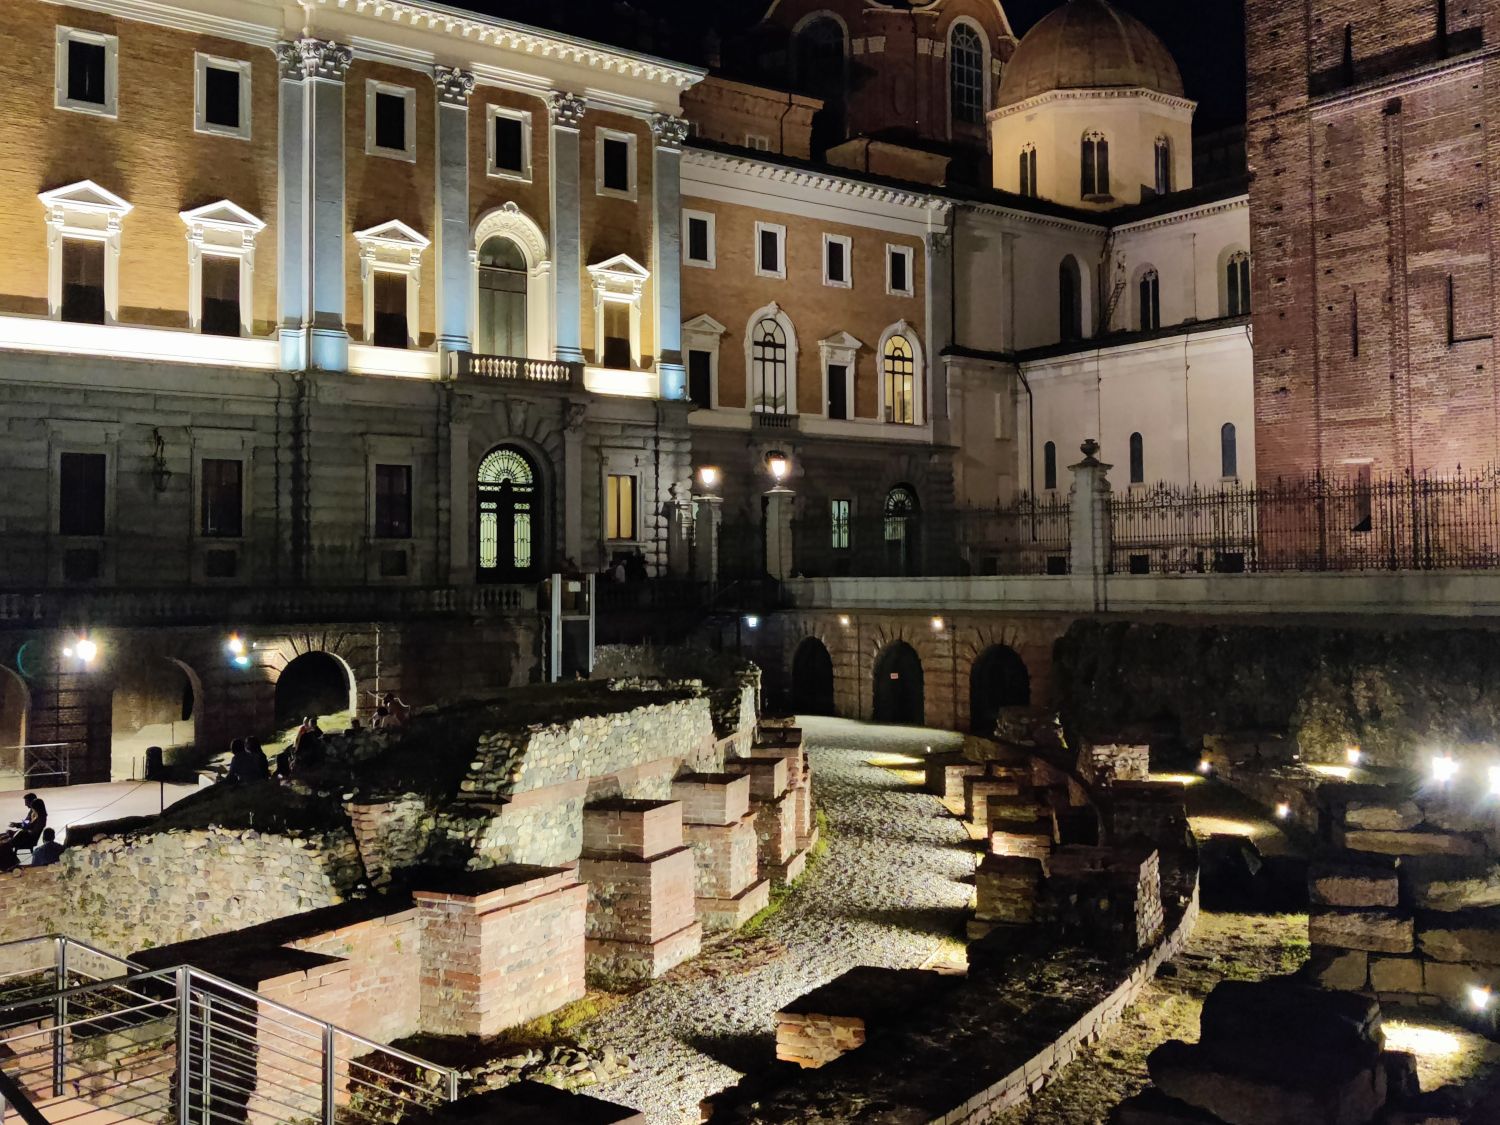 Royal Palace of Turin and the Roman Theater of the ancient Augusta Taurinorum - Italian Archeology